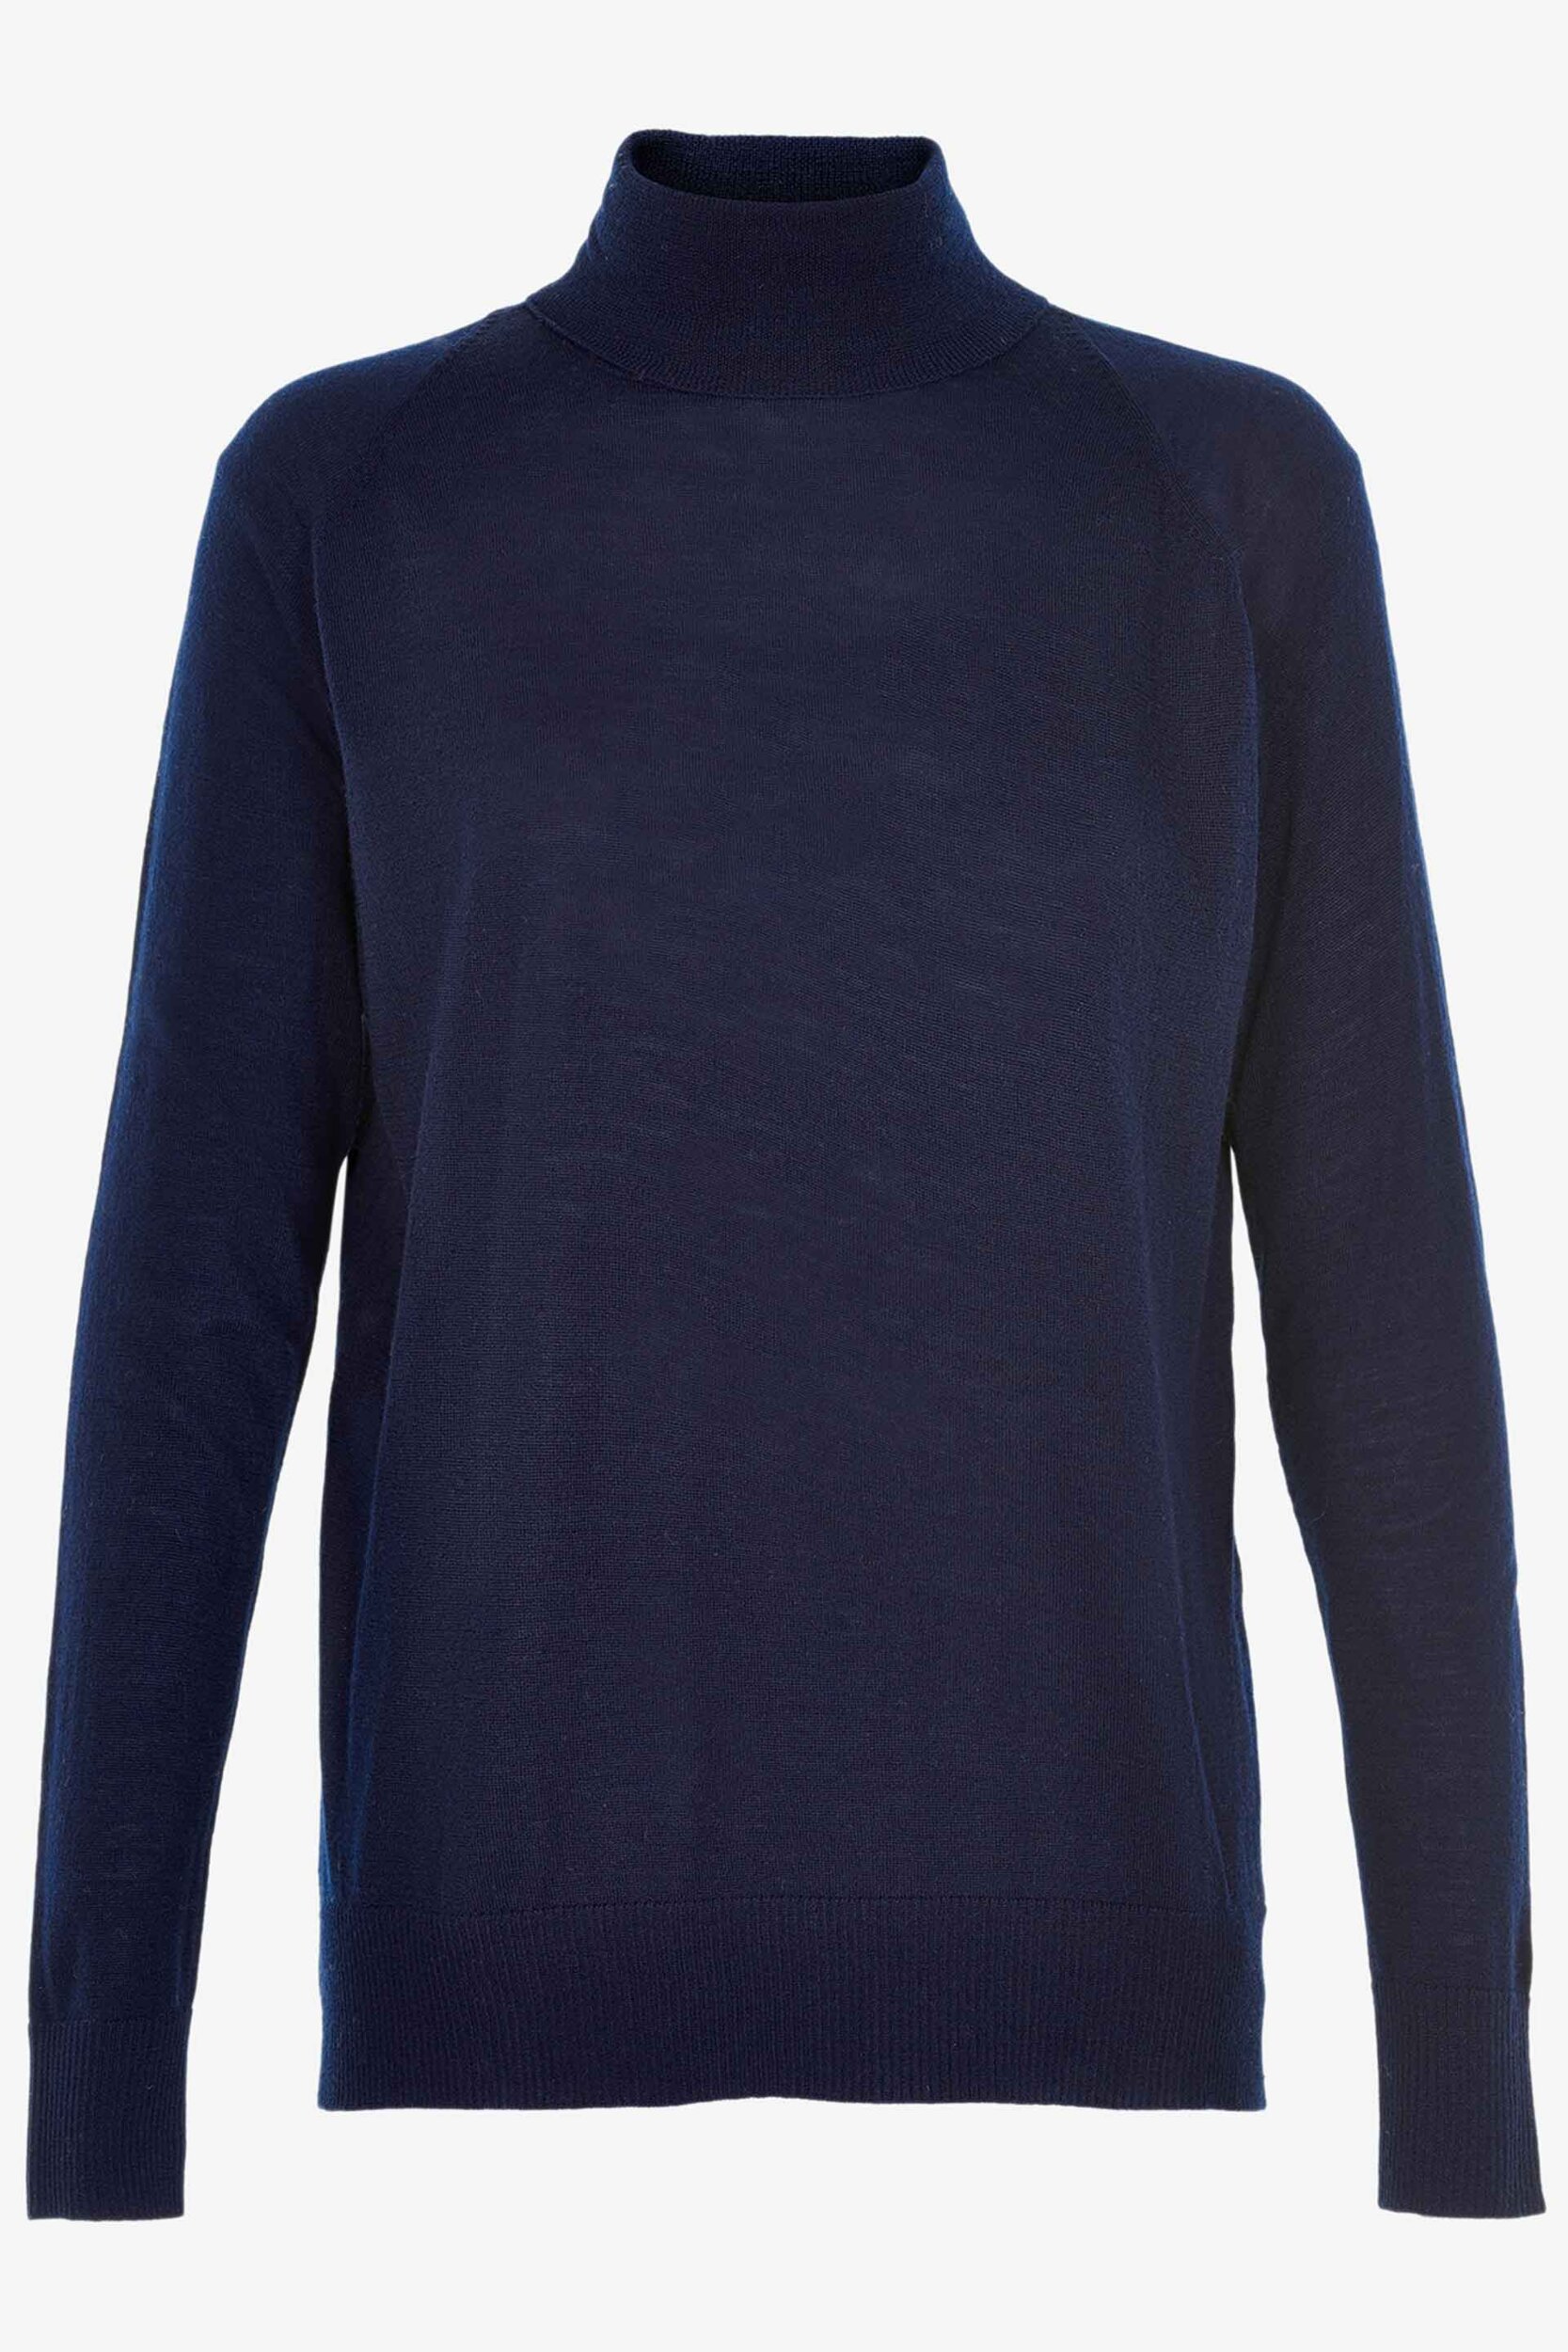 Petra Sweater Night Sky Oversized rollneck - front image